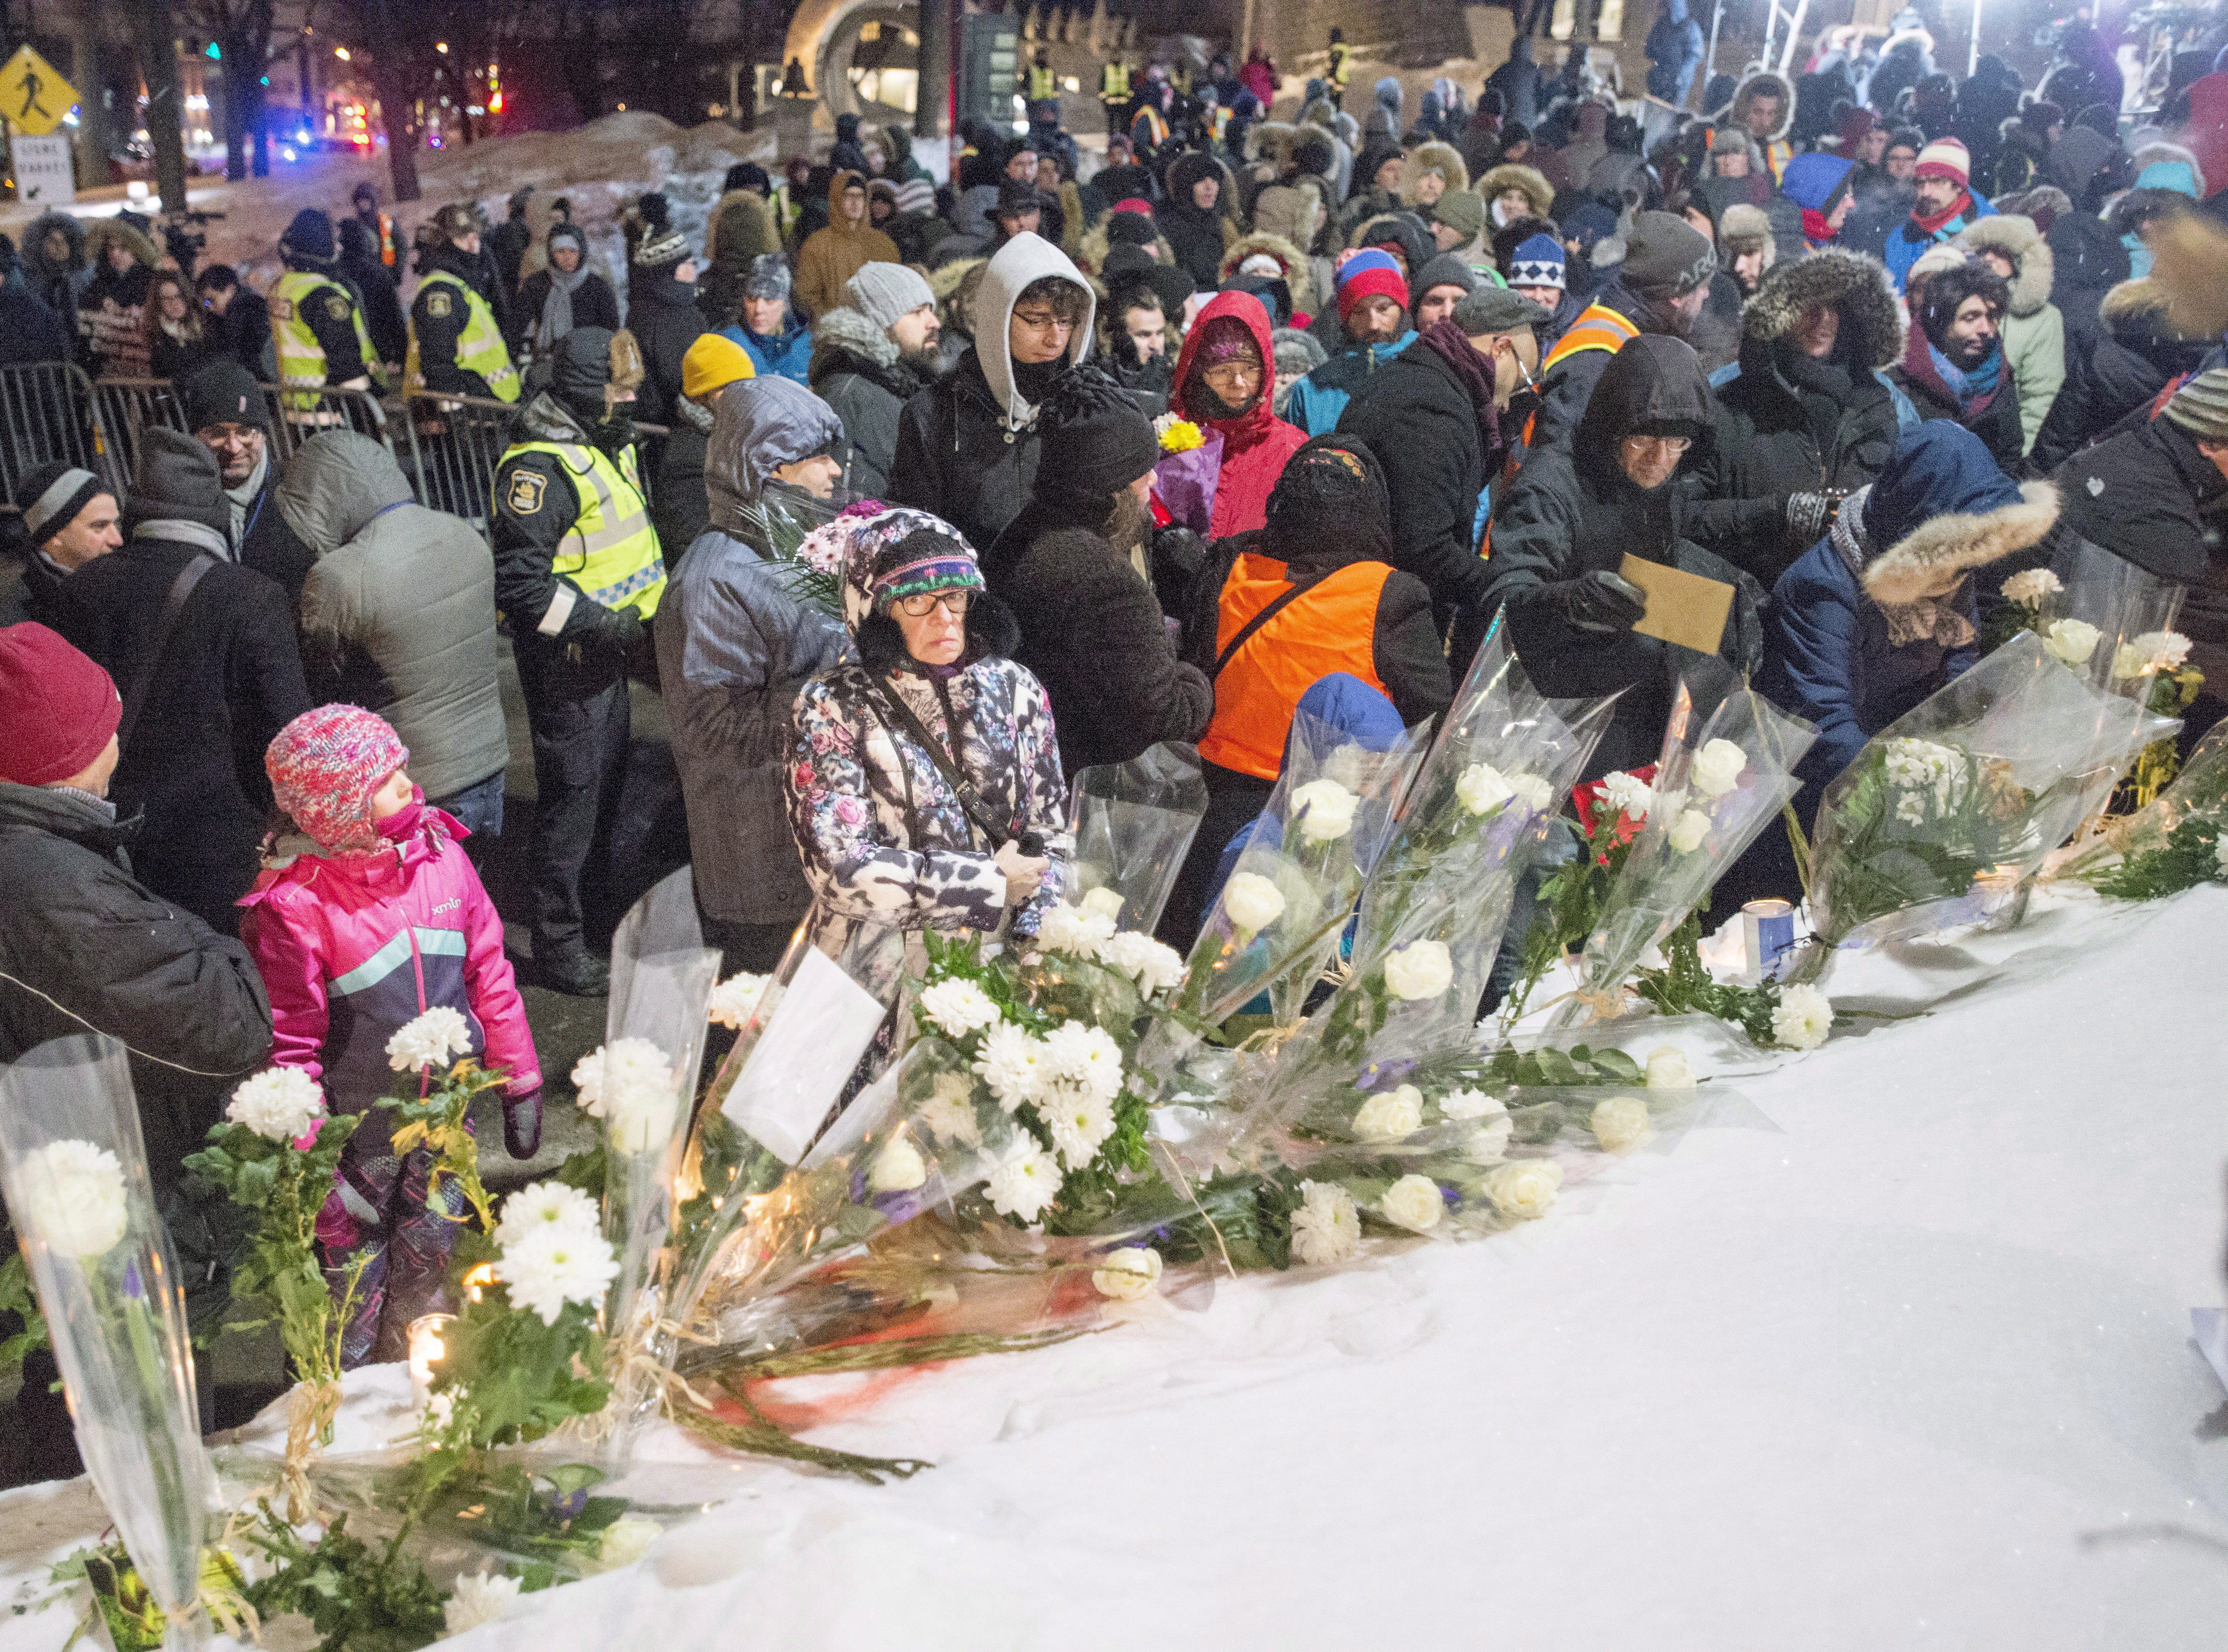 Ceremony to honour memory of those killed in 2017 Quebec City mosque attack